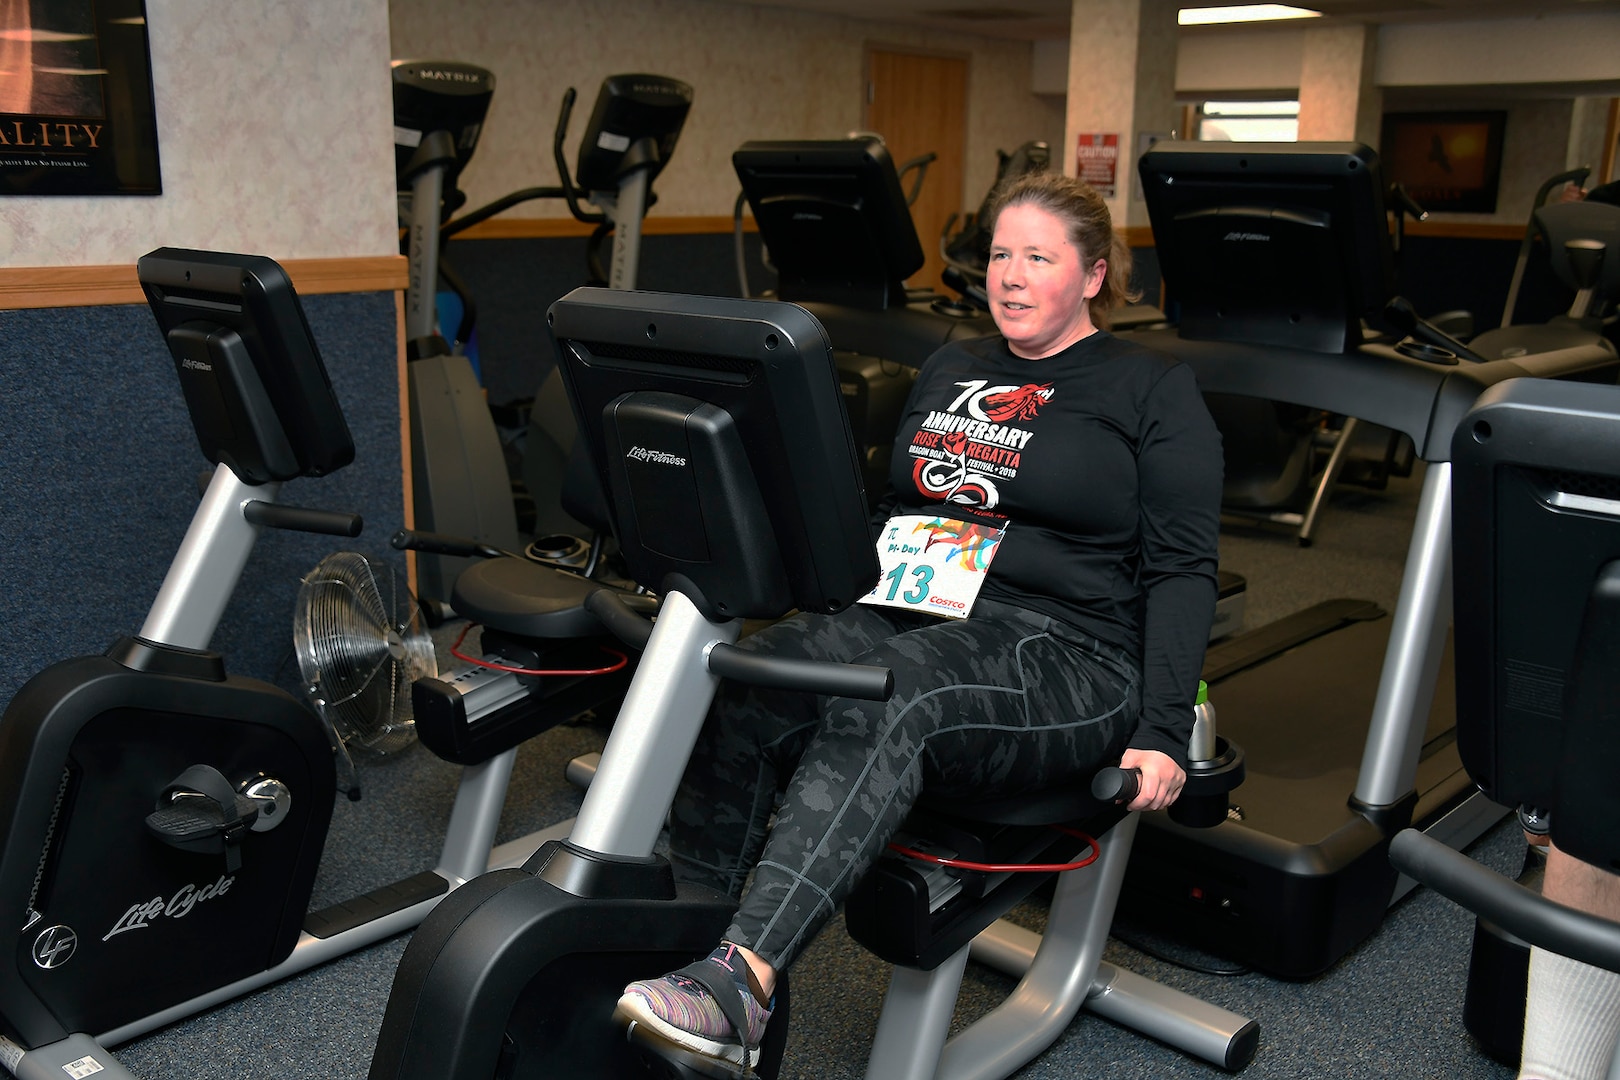 Melissa Smith pedals away on the recumbent bike during the Pi Day observance March 11.